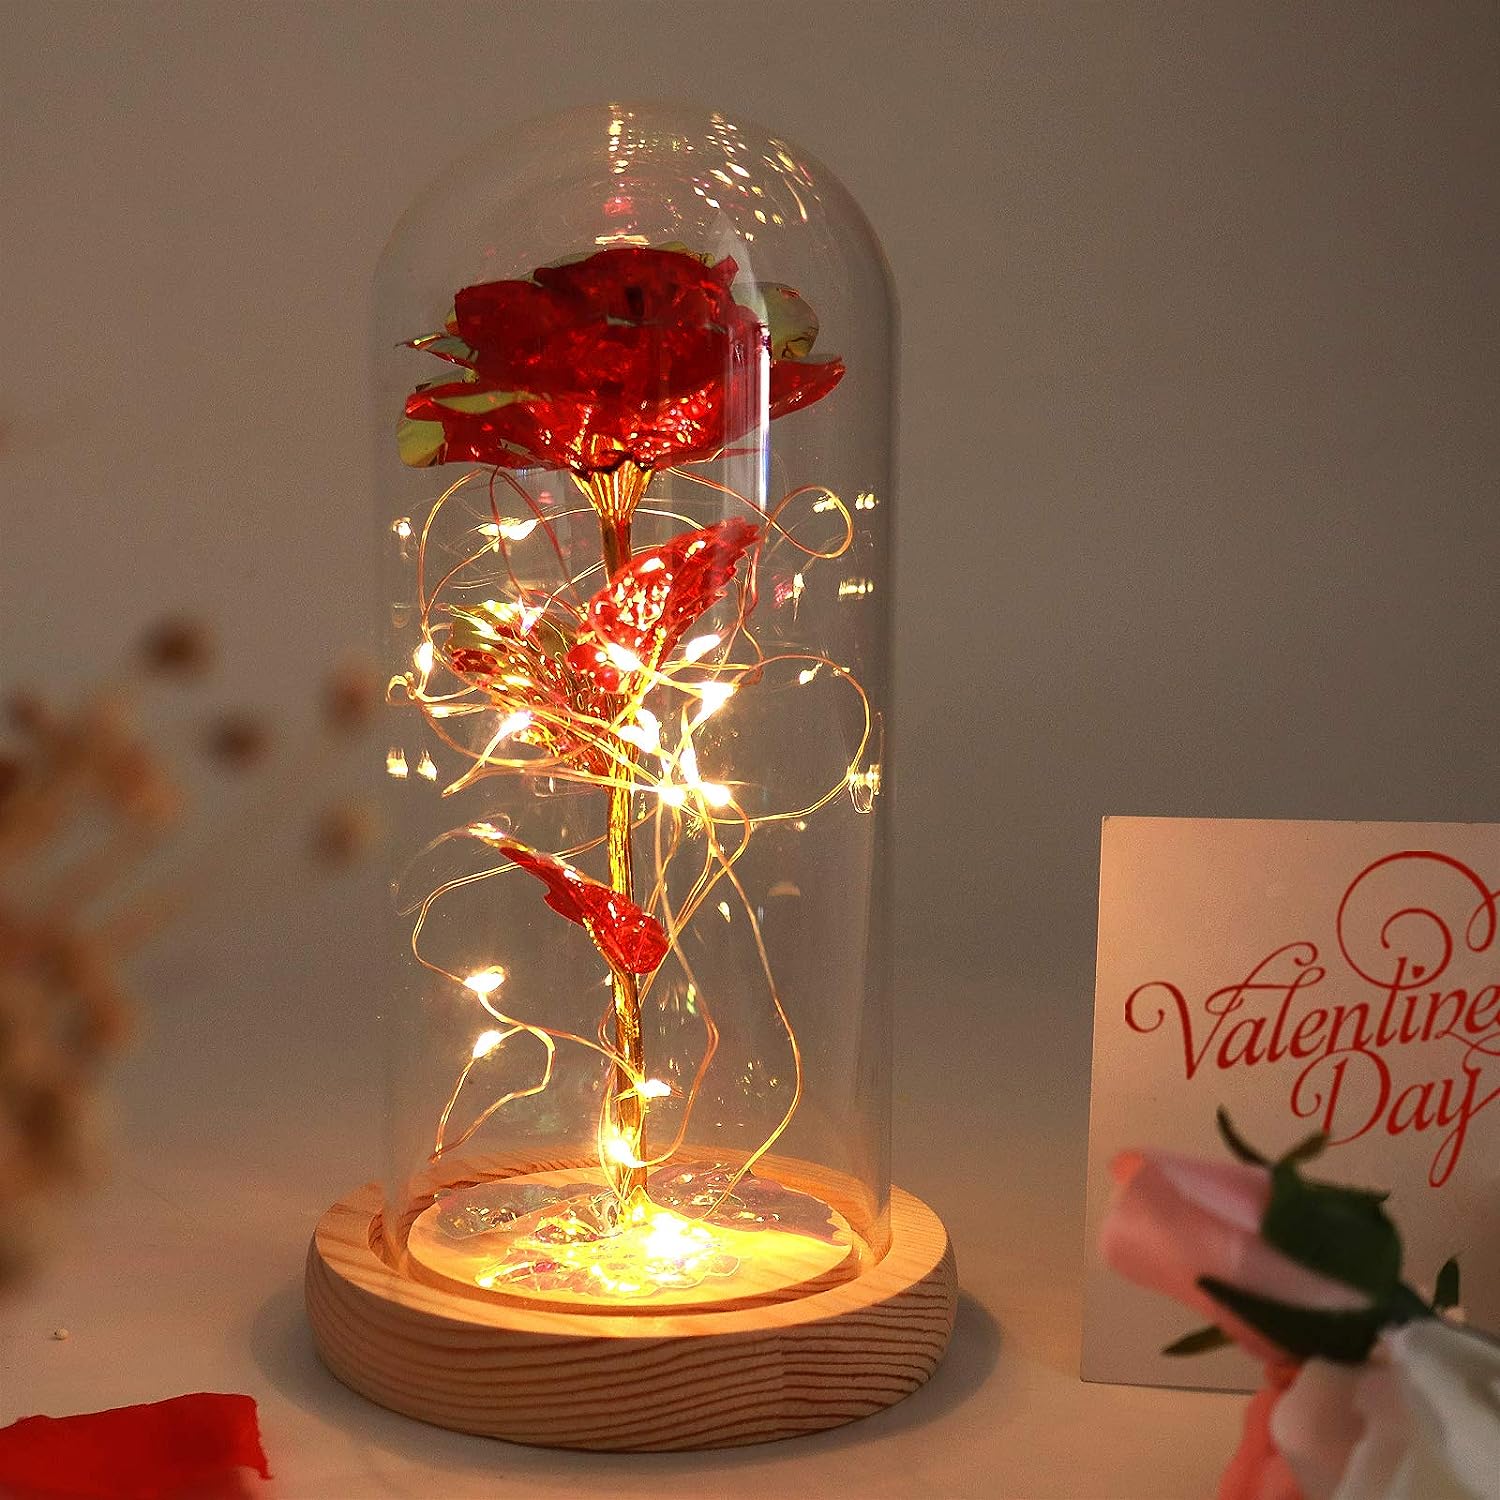 Colorful Artificial Flower Rose Gift, Colorful Red Rose Flower with Led Light String,Lasts Forever in A Glass Dome